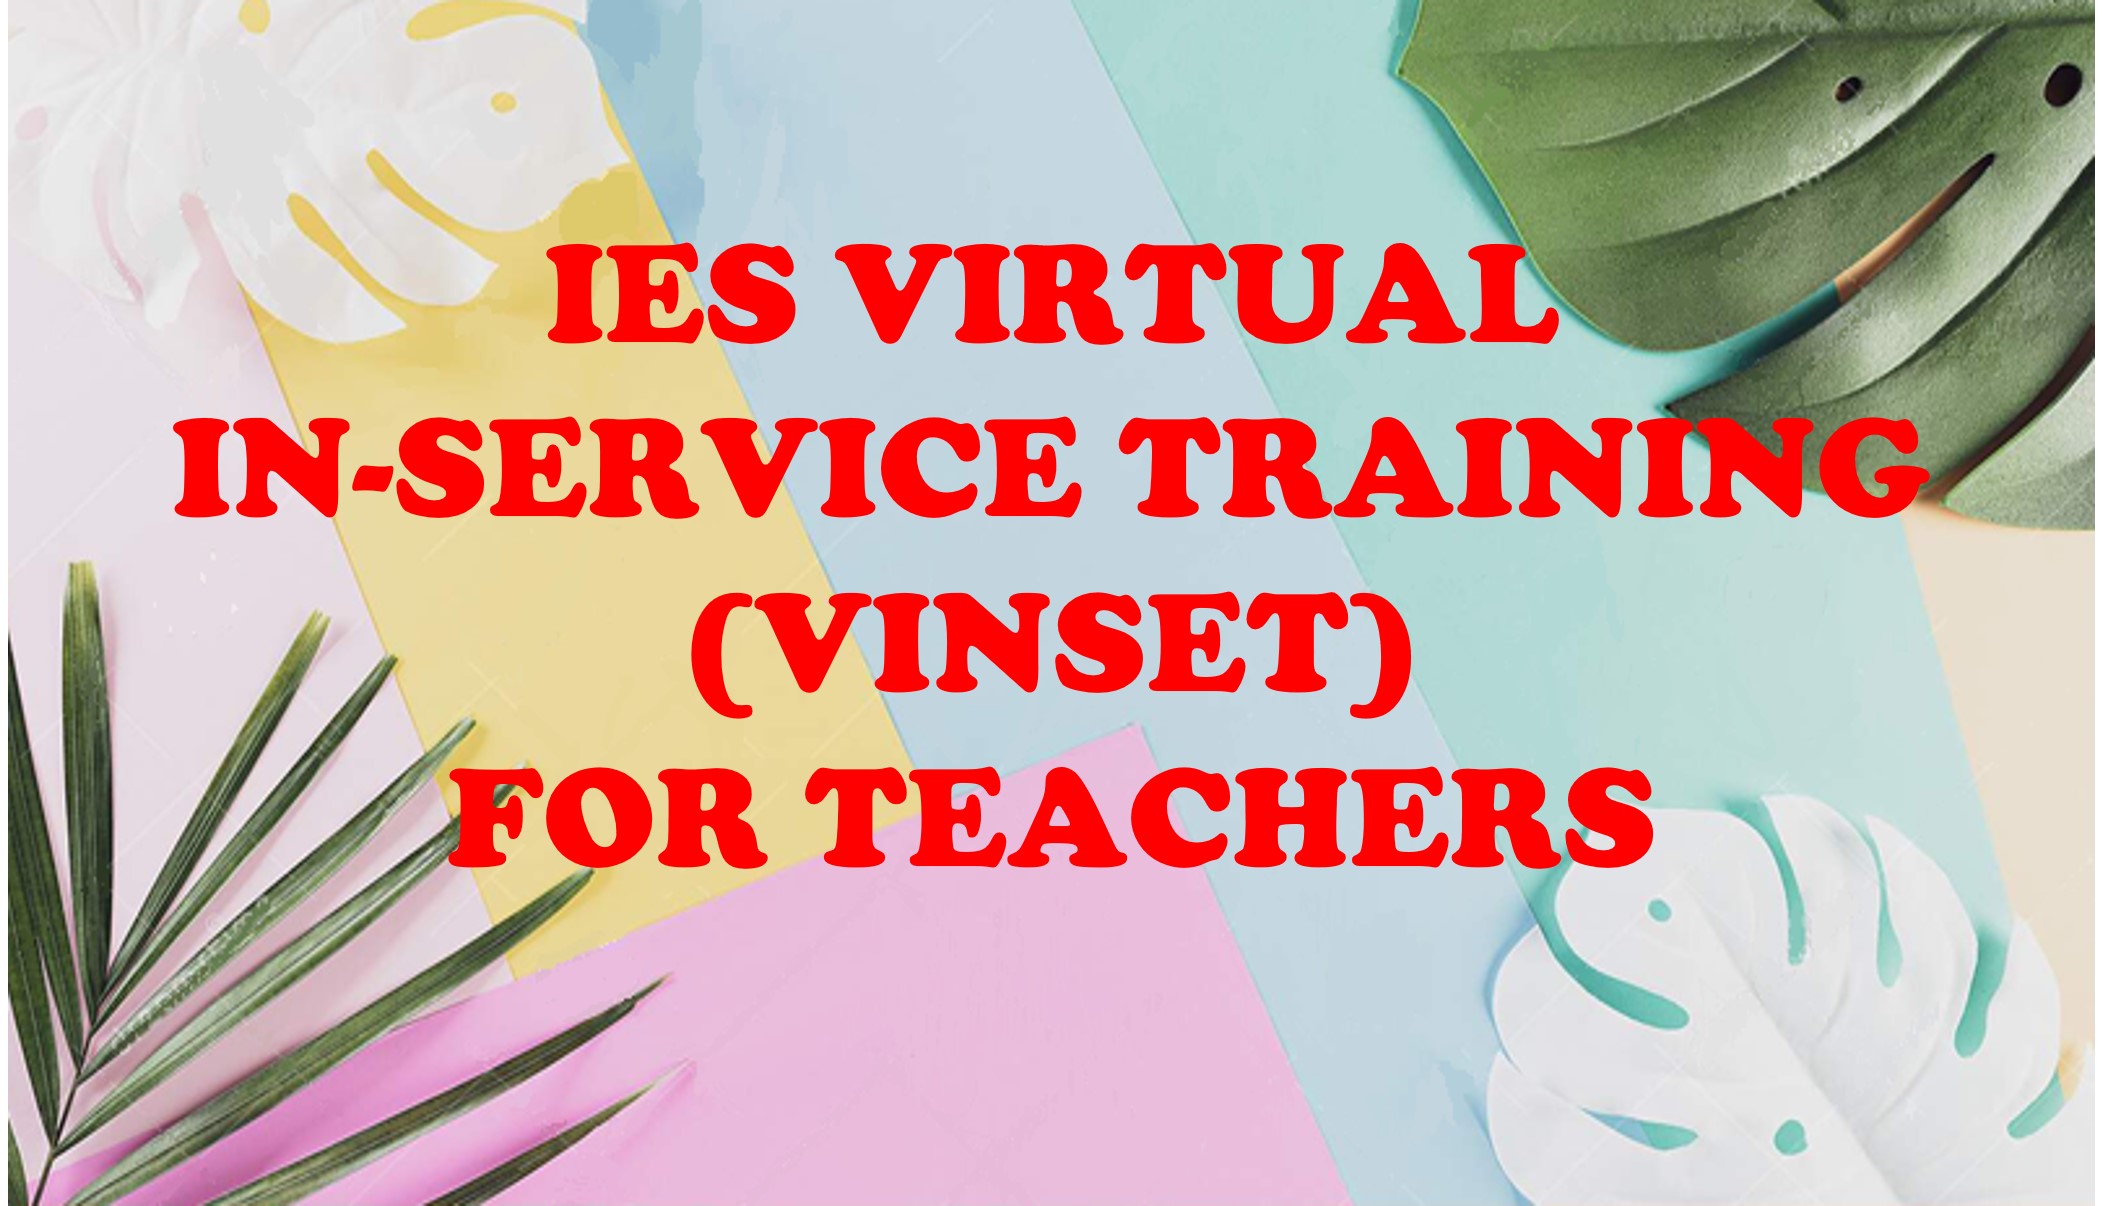 IES VIRTUAL IN-SERVICE TRAINING 2021